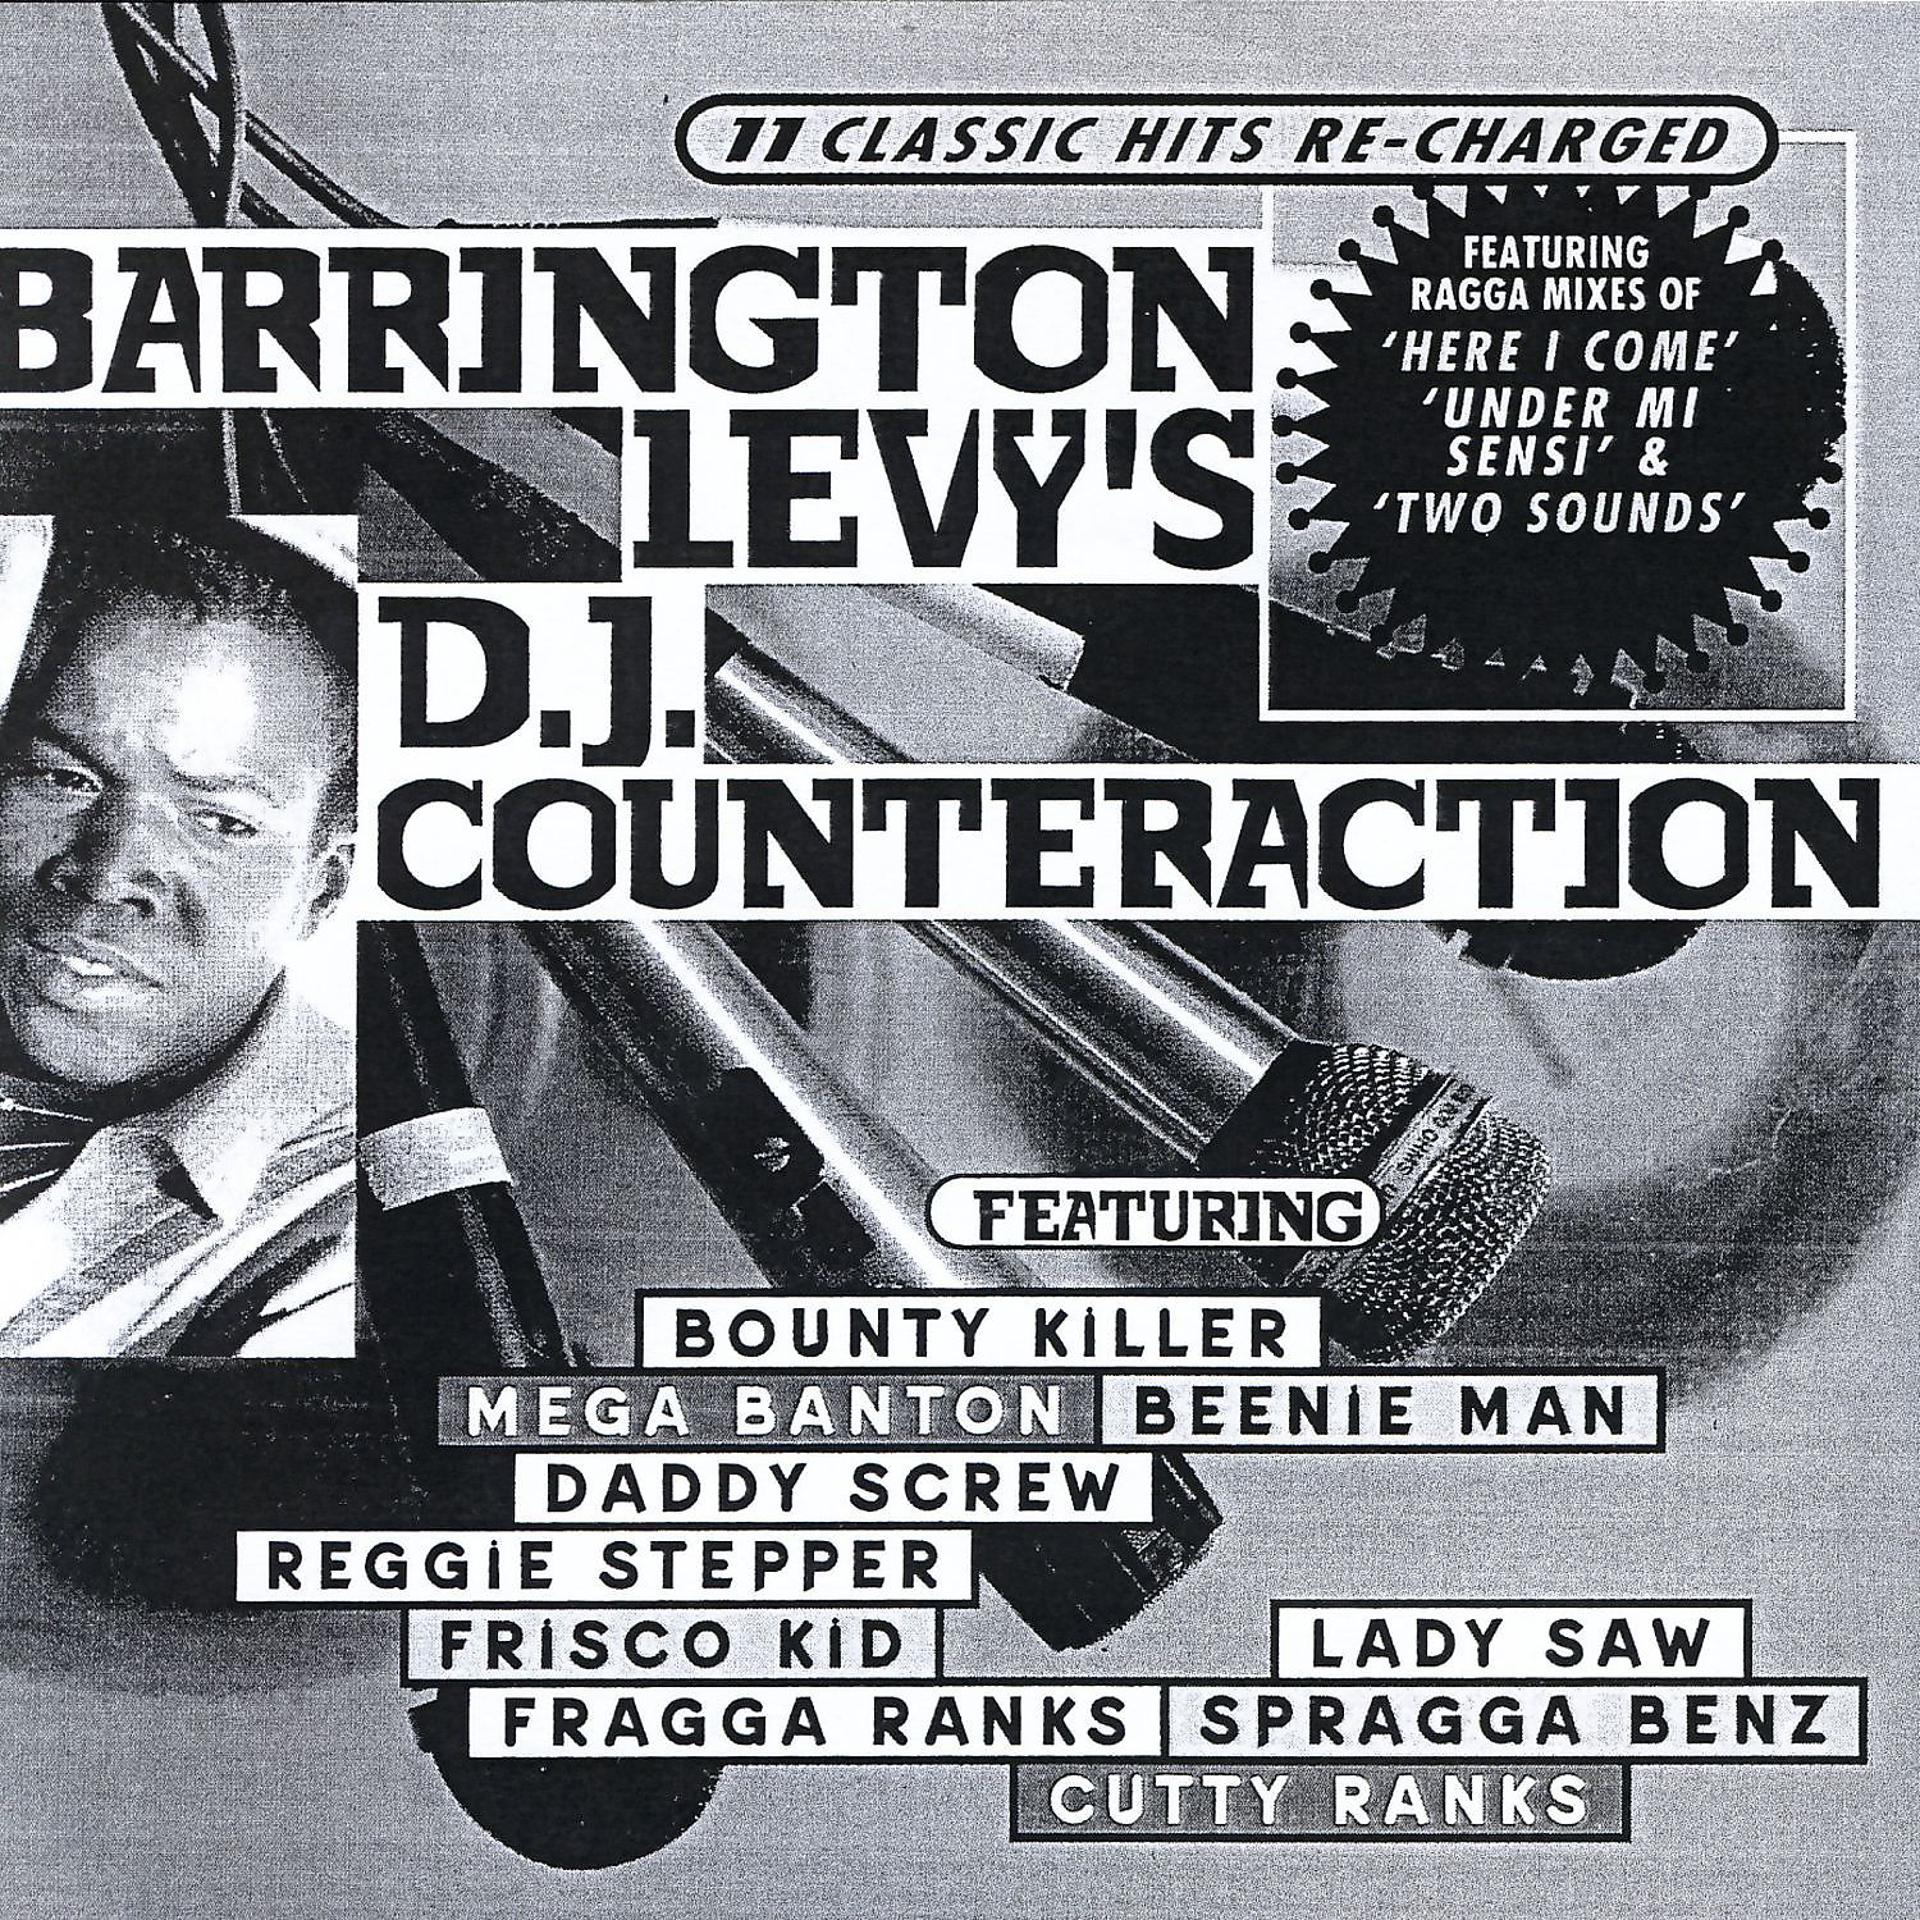 Постер альбома Barrington Levy's DJ Counteraction (11 Classic Hits Re-Charged)